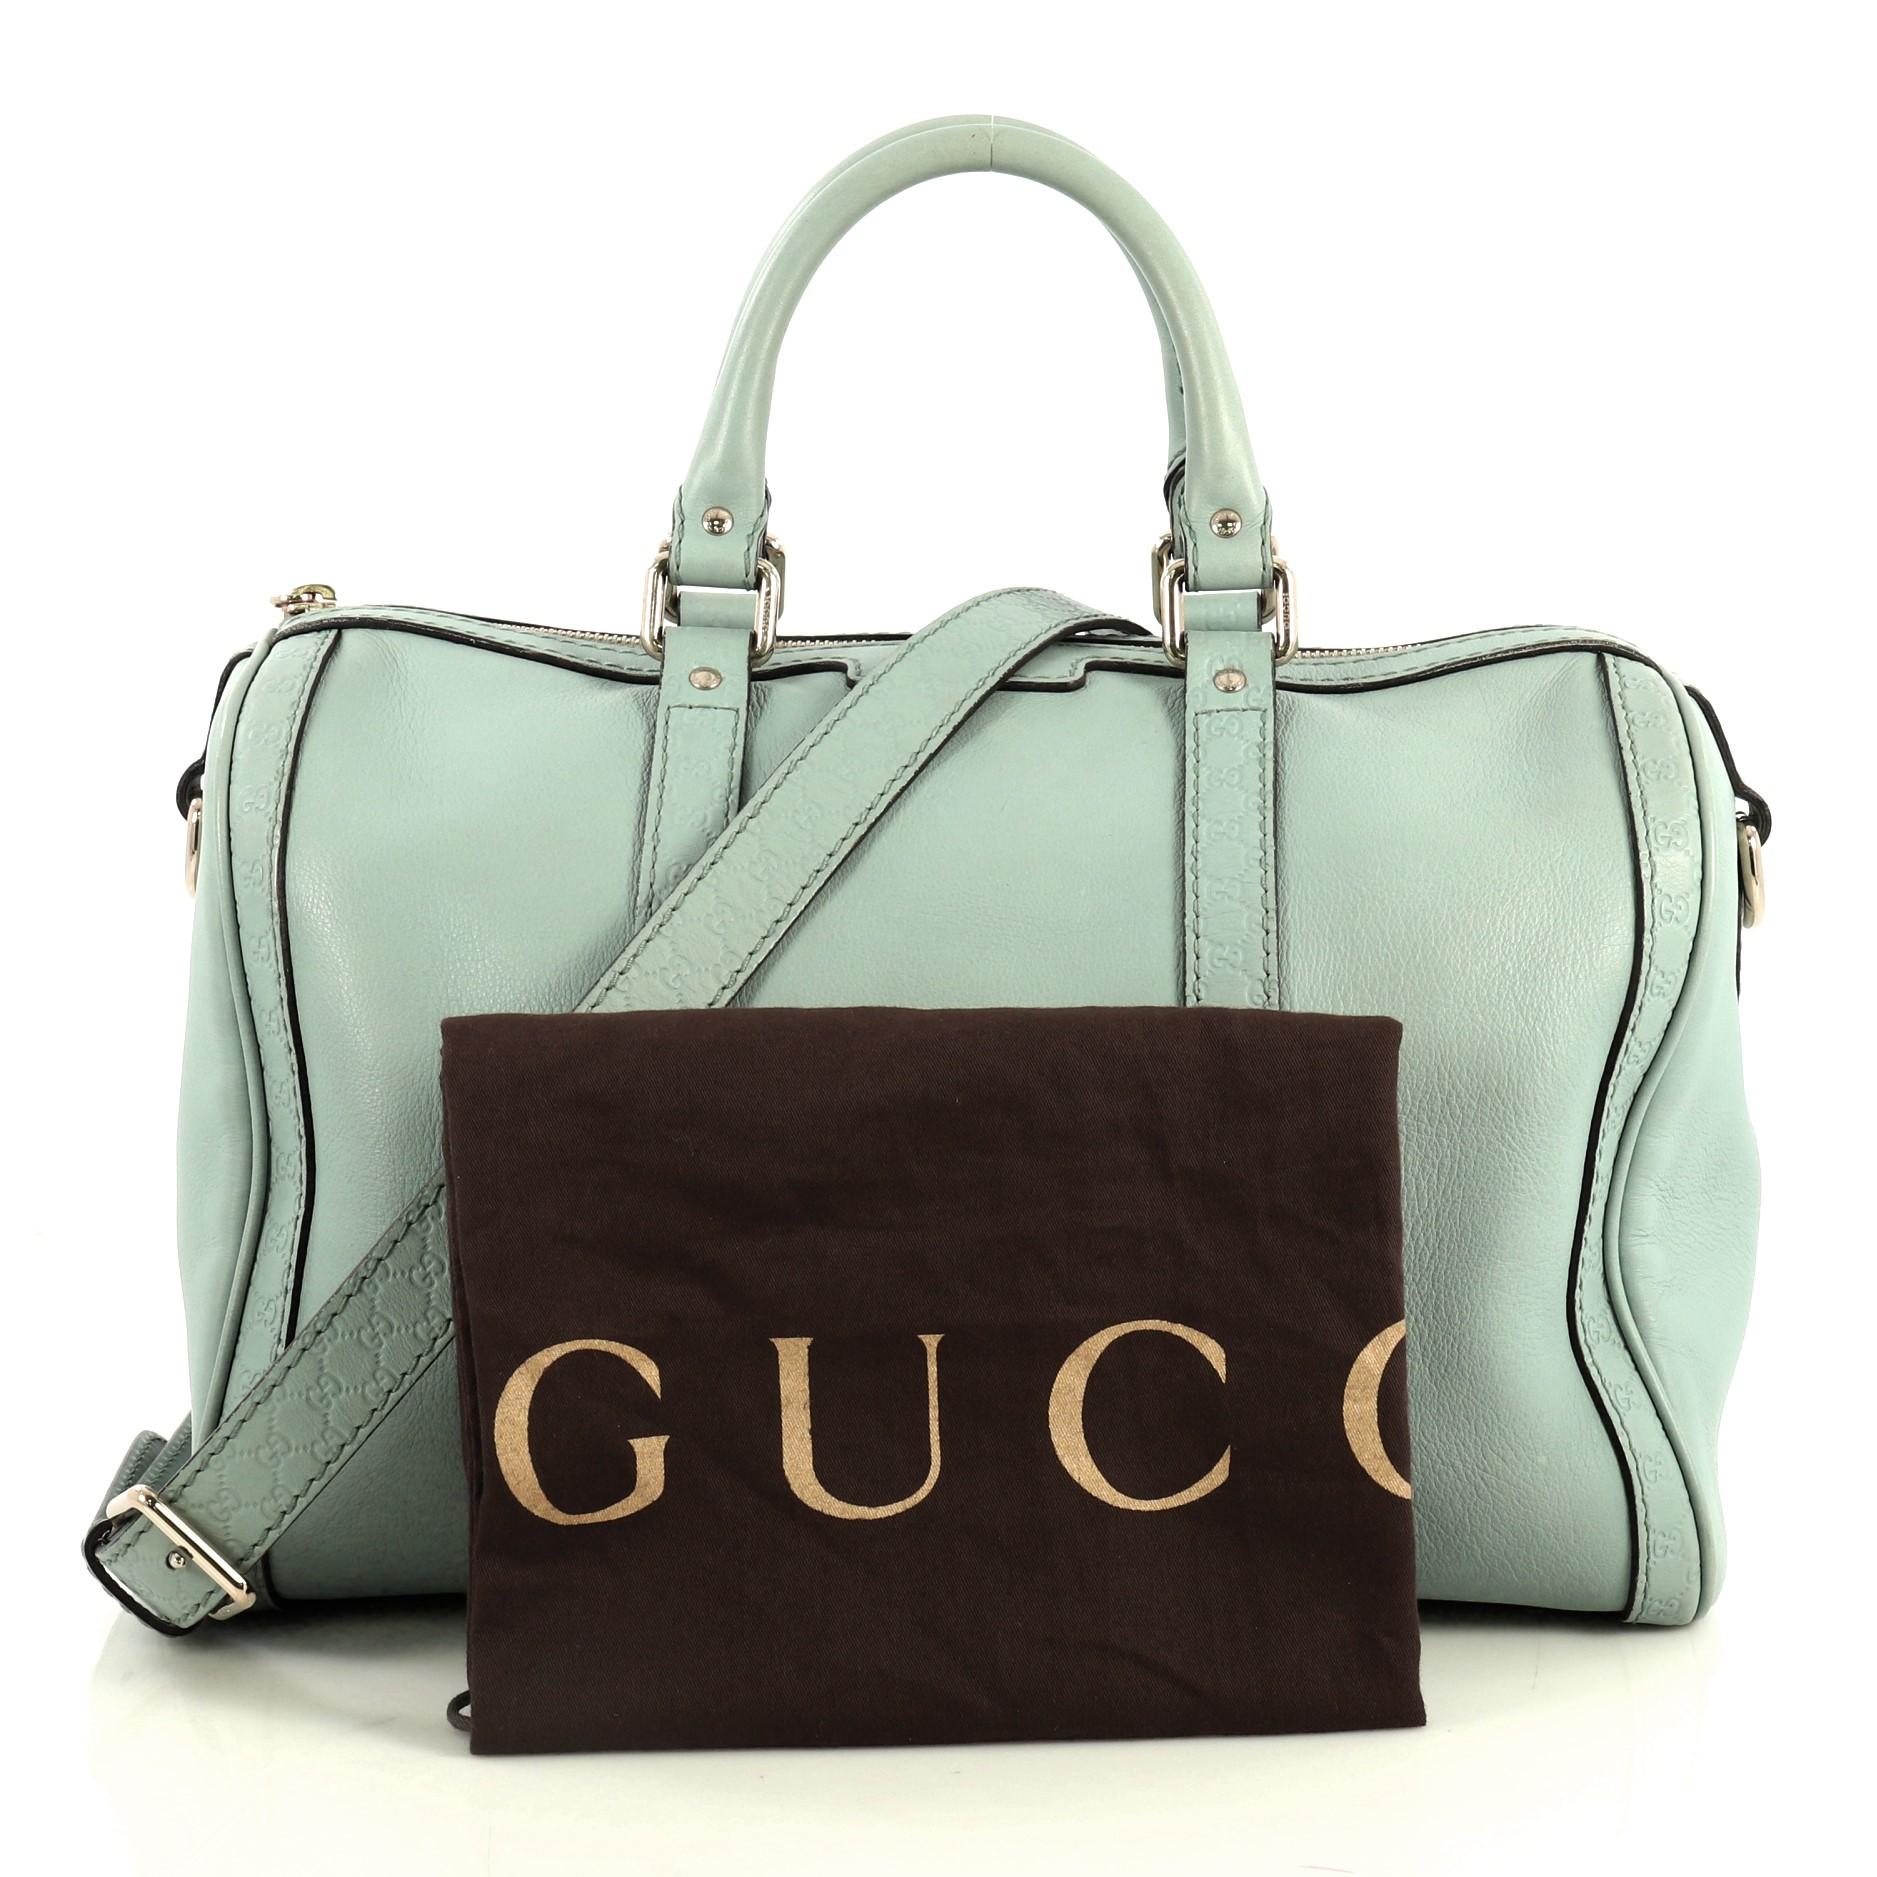 This Gucci Joy Boston Bag Leather with Microguccissima Medium, crafted from blue leather, features dual rolled handles, microguccissima leather trim and gold-tone hardware. Its zip closure opens to a neutral canvas interior with slip